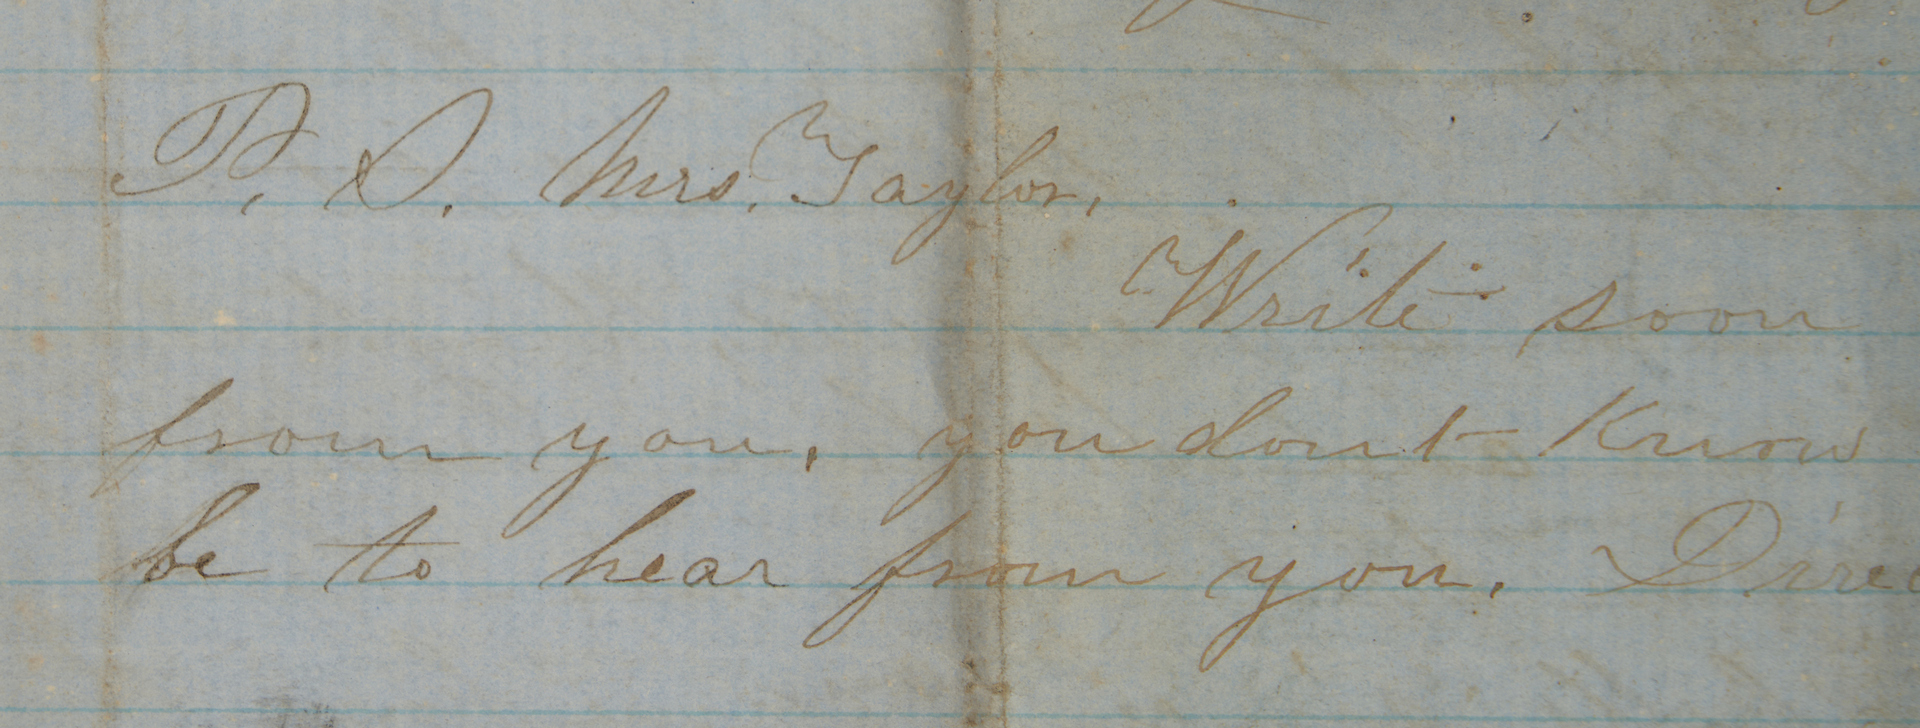 Lot 718: Civil War Feamster/Taylor Family Archive, 8 items